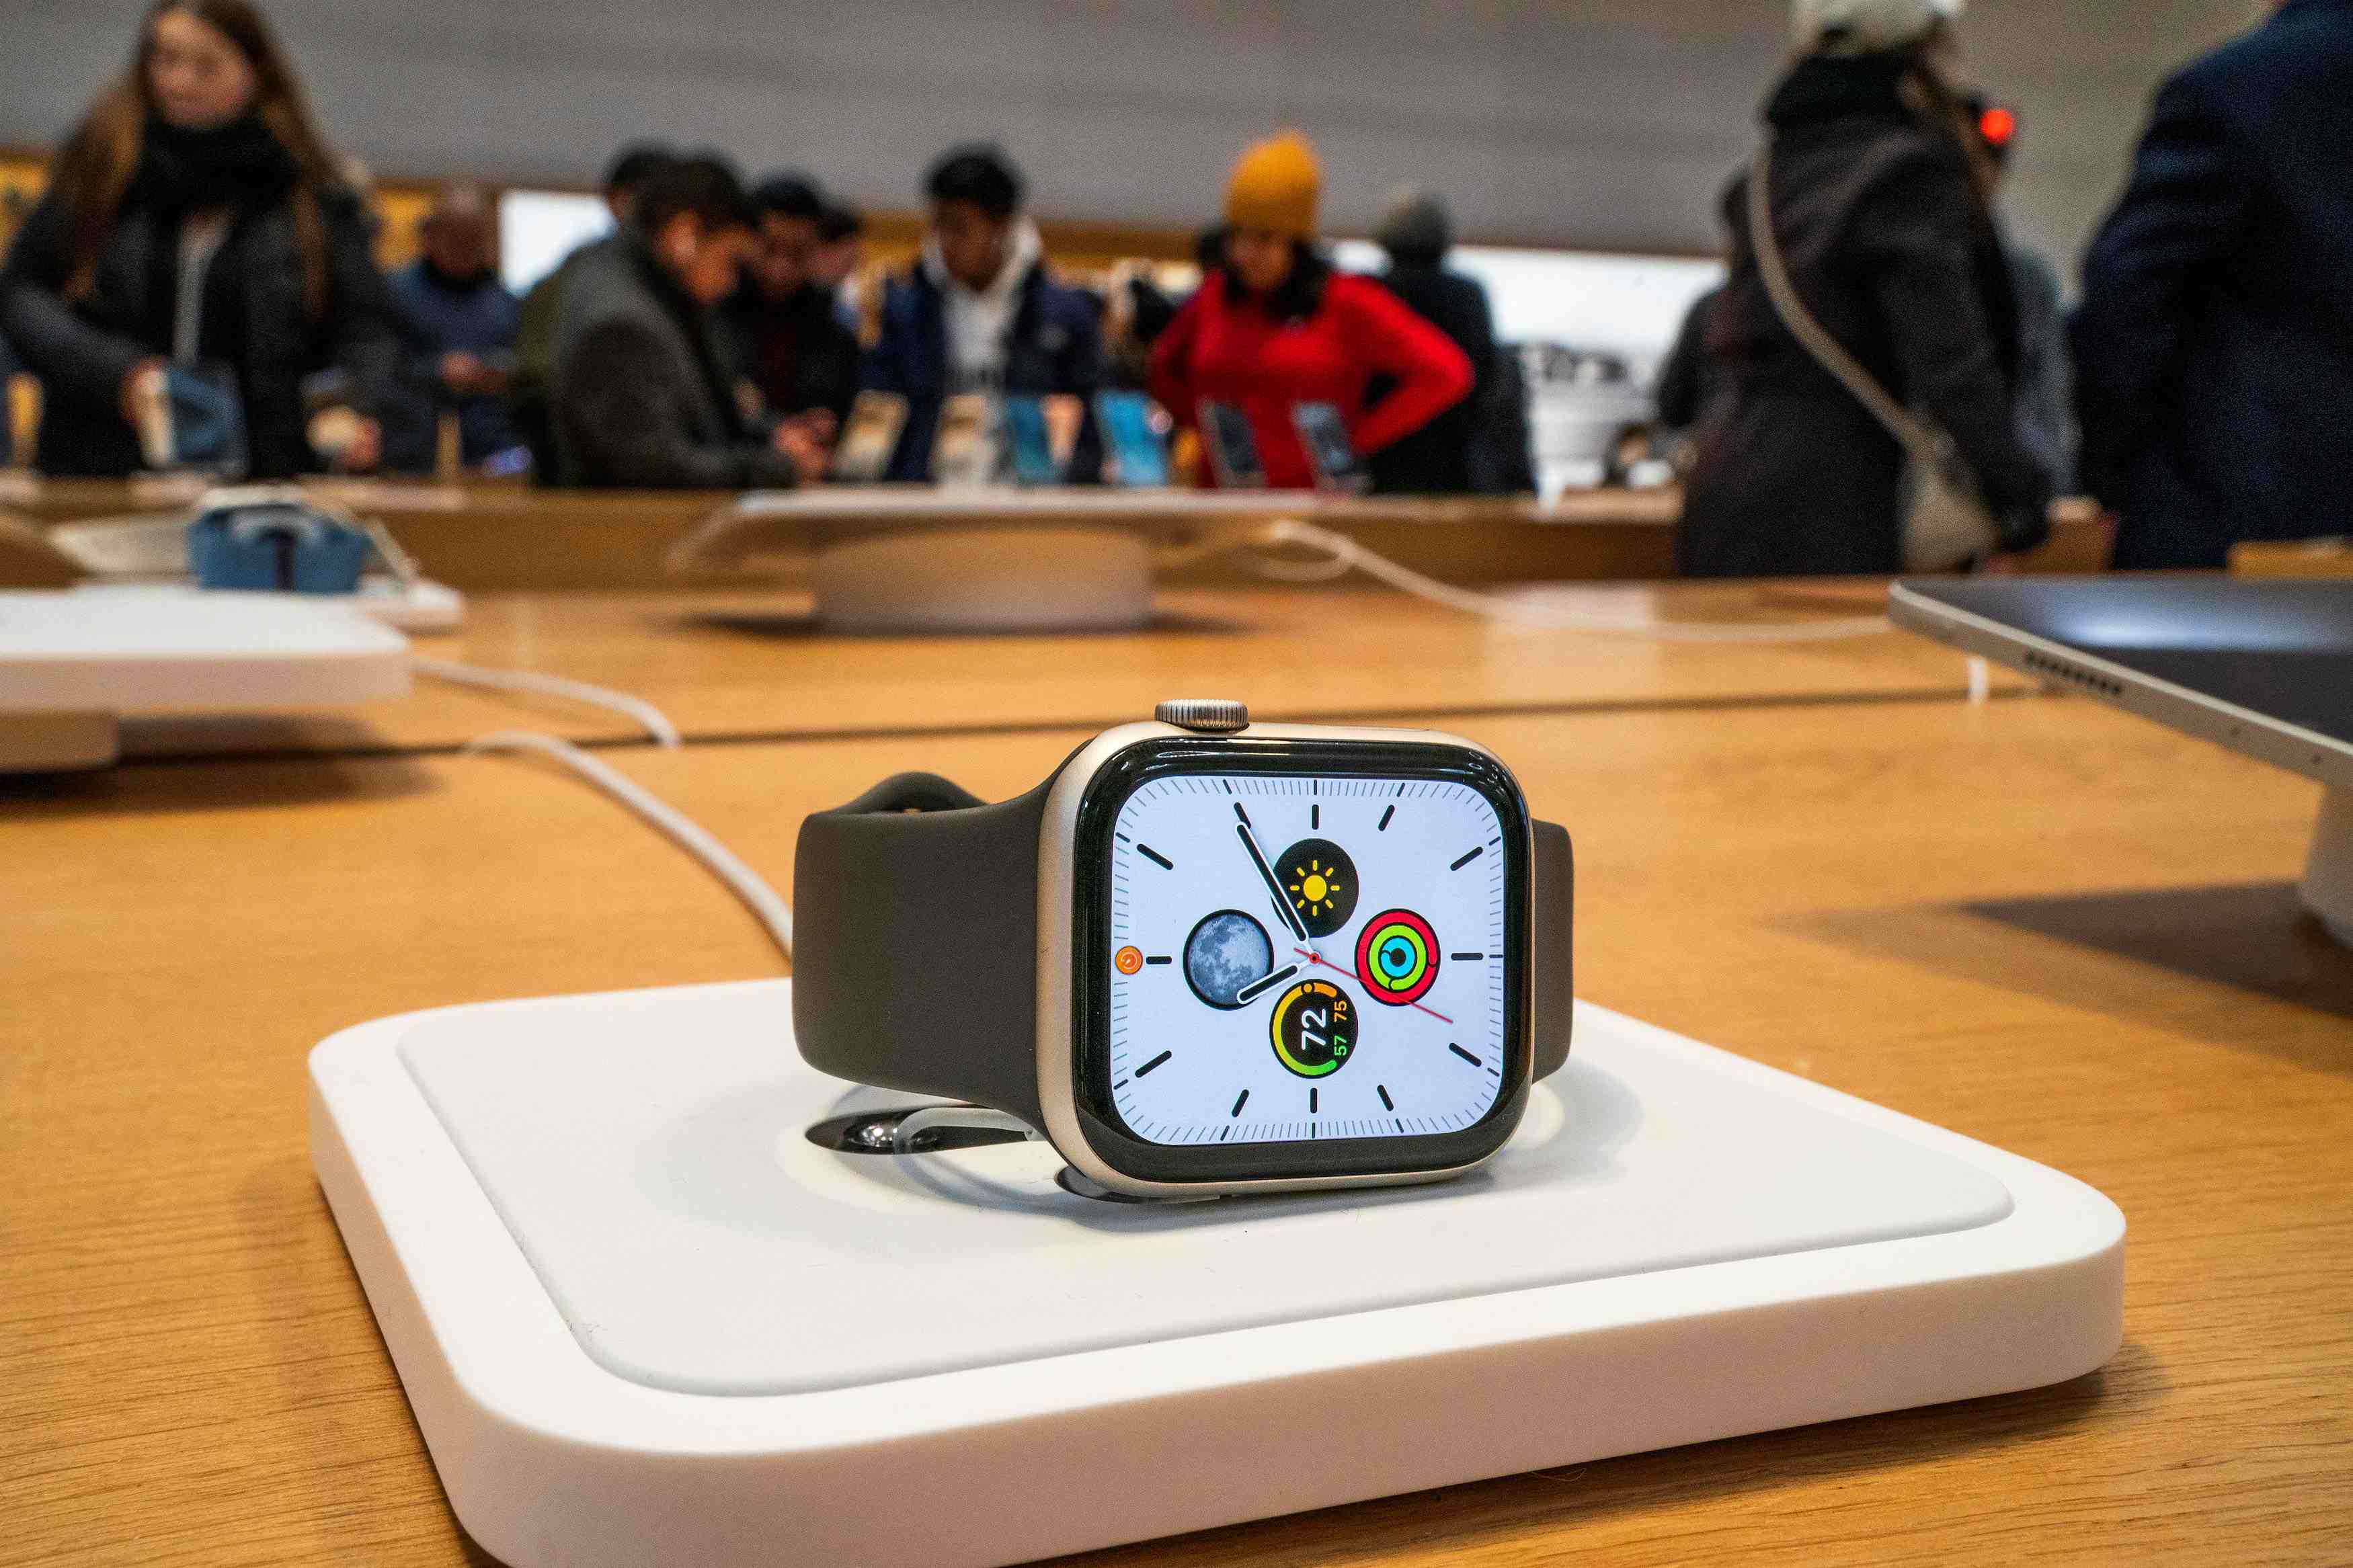 apple-watch-import-ban-paused-appeals-court-halts-ban-after-apples-emergency-request